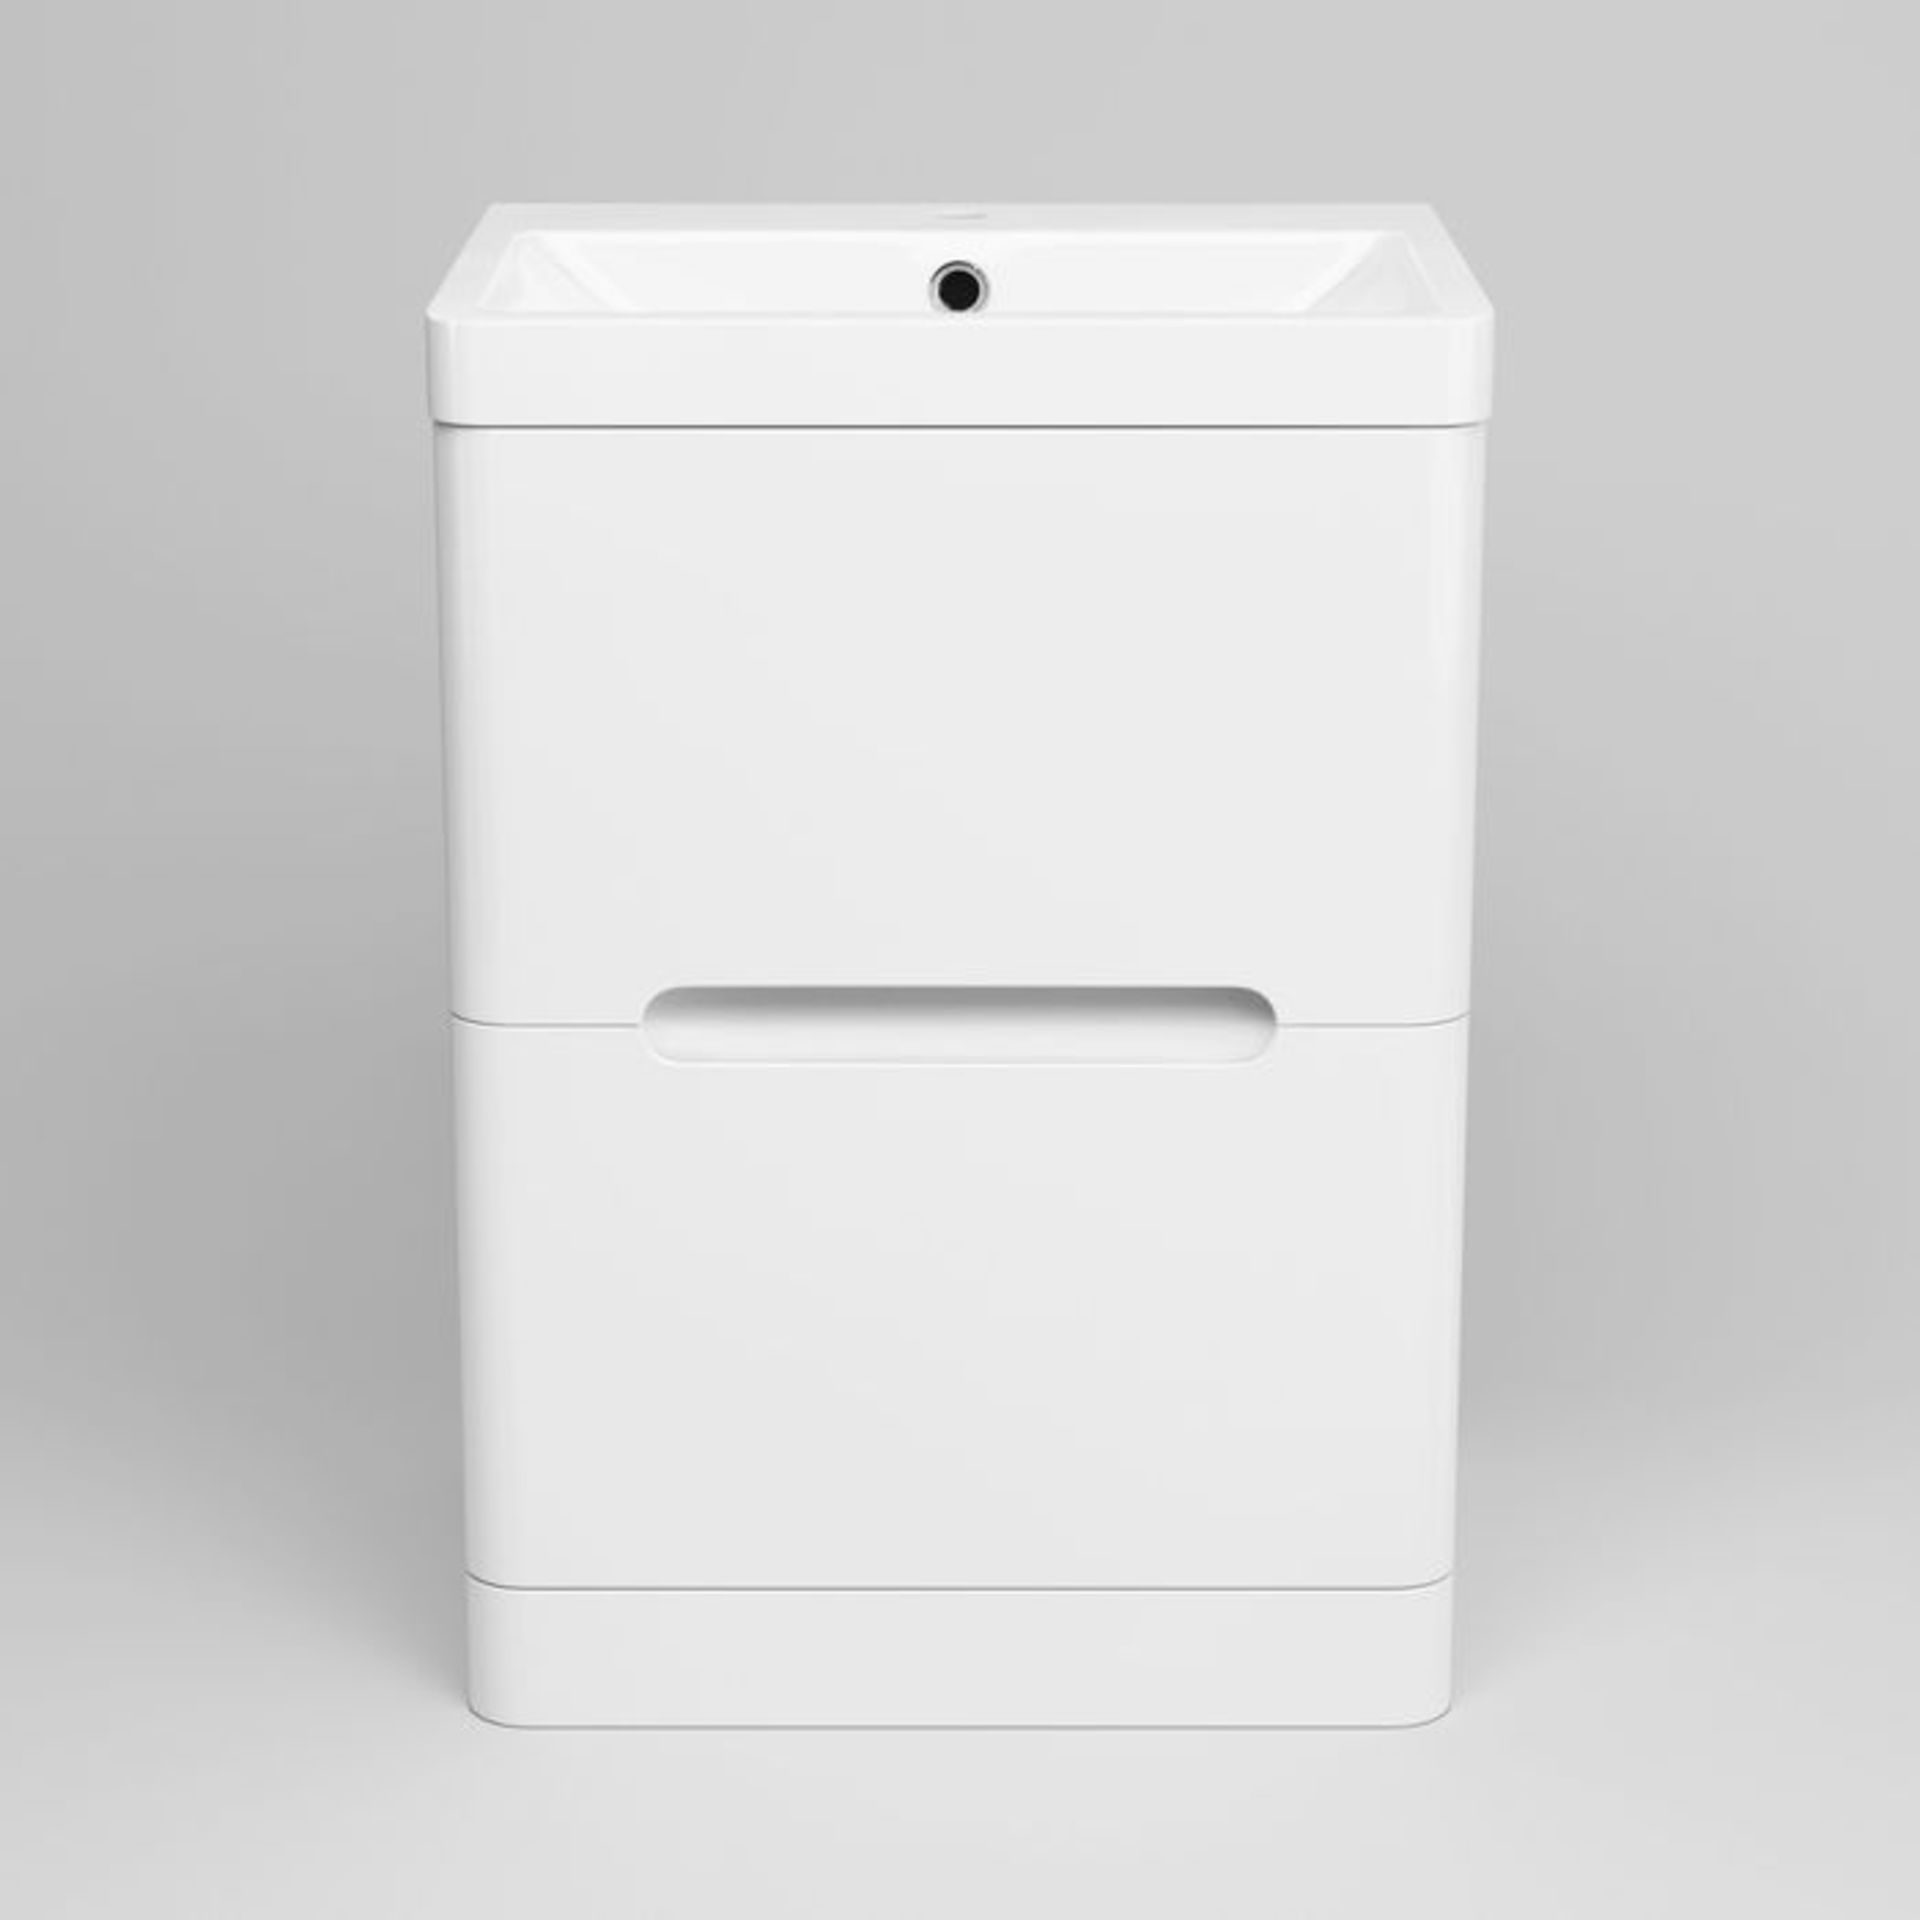 (G75) 600mm Tuscany Gloss White Built In Basin Double Drawer Unit - Floor Standing RRP £499.99. - Image 5 of 5